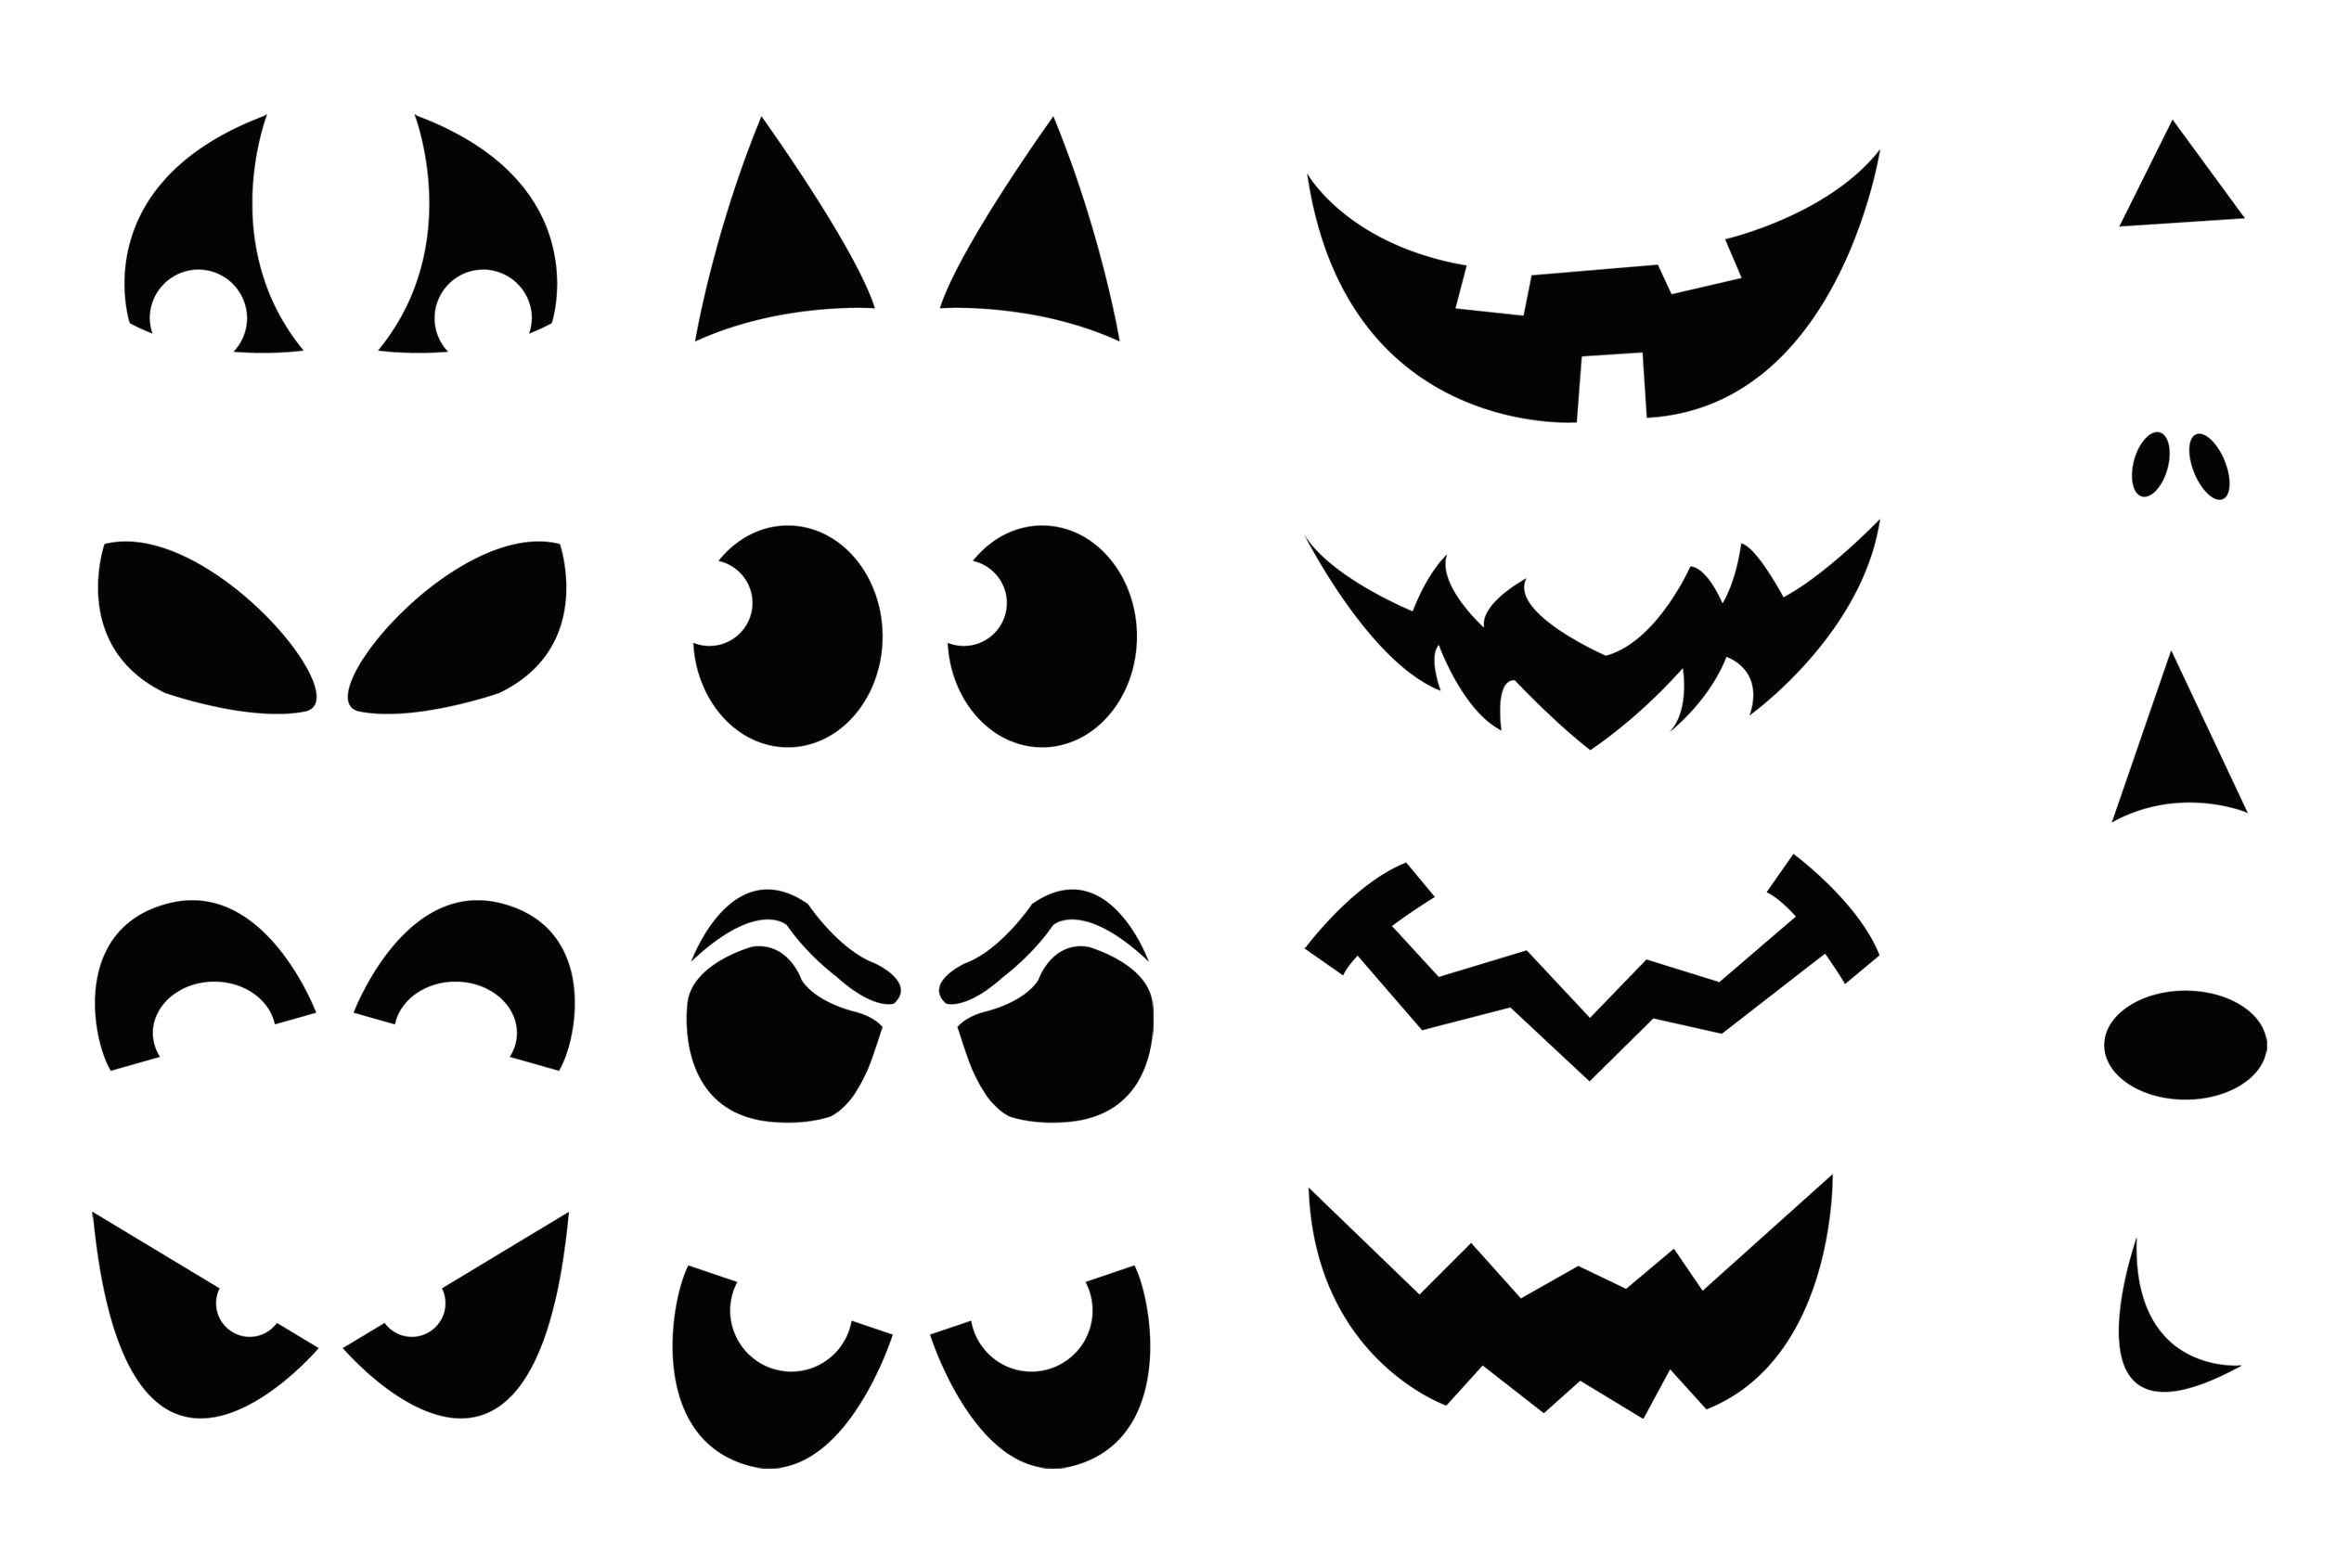 shapes for ghost eye cutouts after the face is picked out cut out the image with an xacto knife or